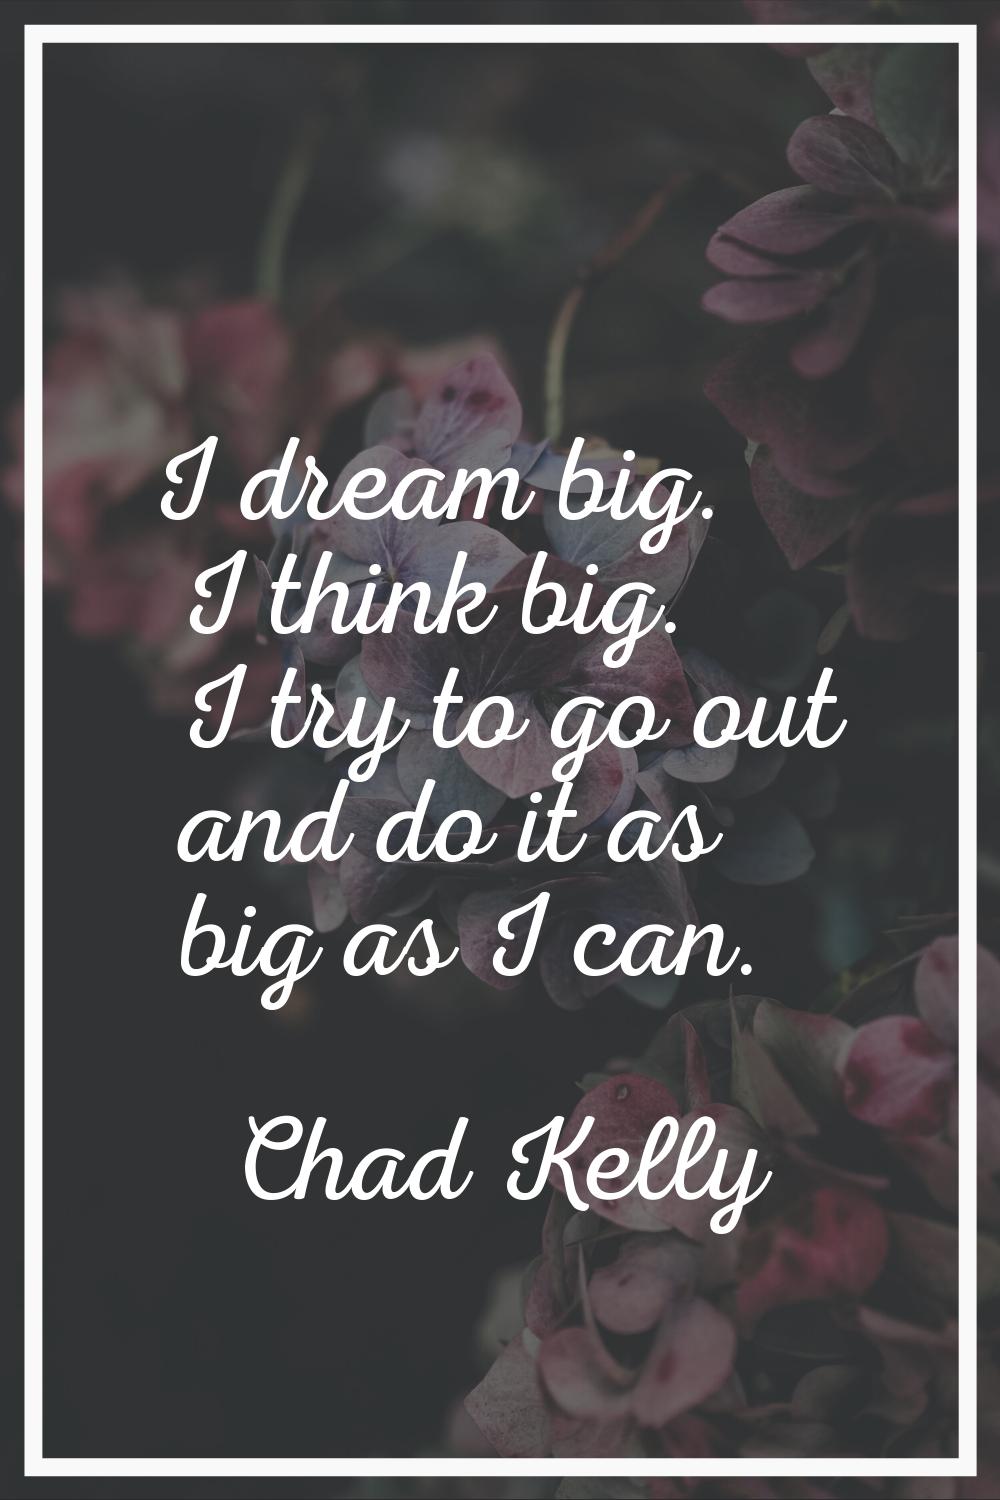 I dream big. I think big. I try to go out and do it as big as I can.